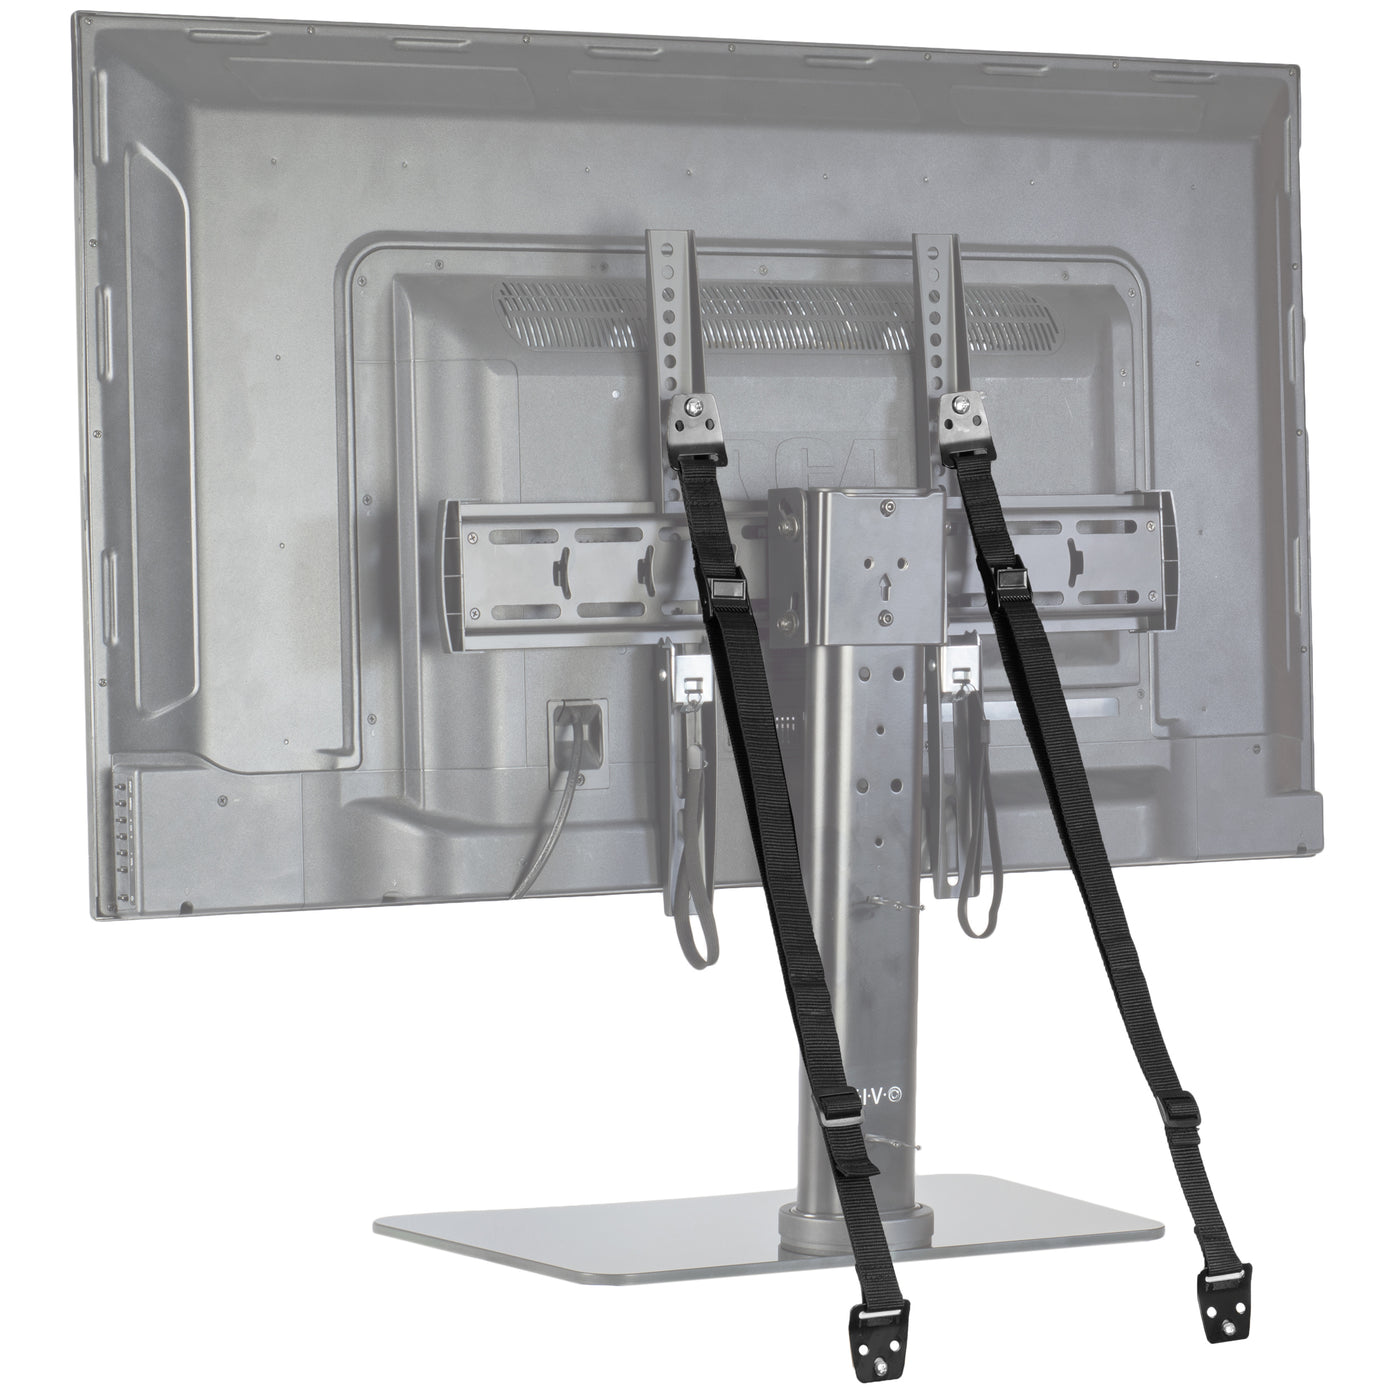 Heavy-duty strap cable management for extra secure TV mounting.